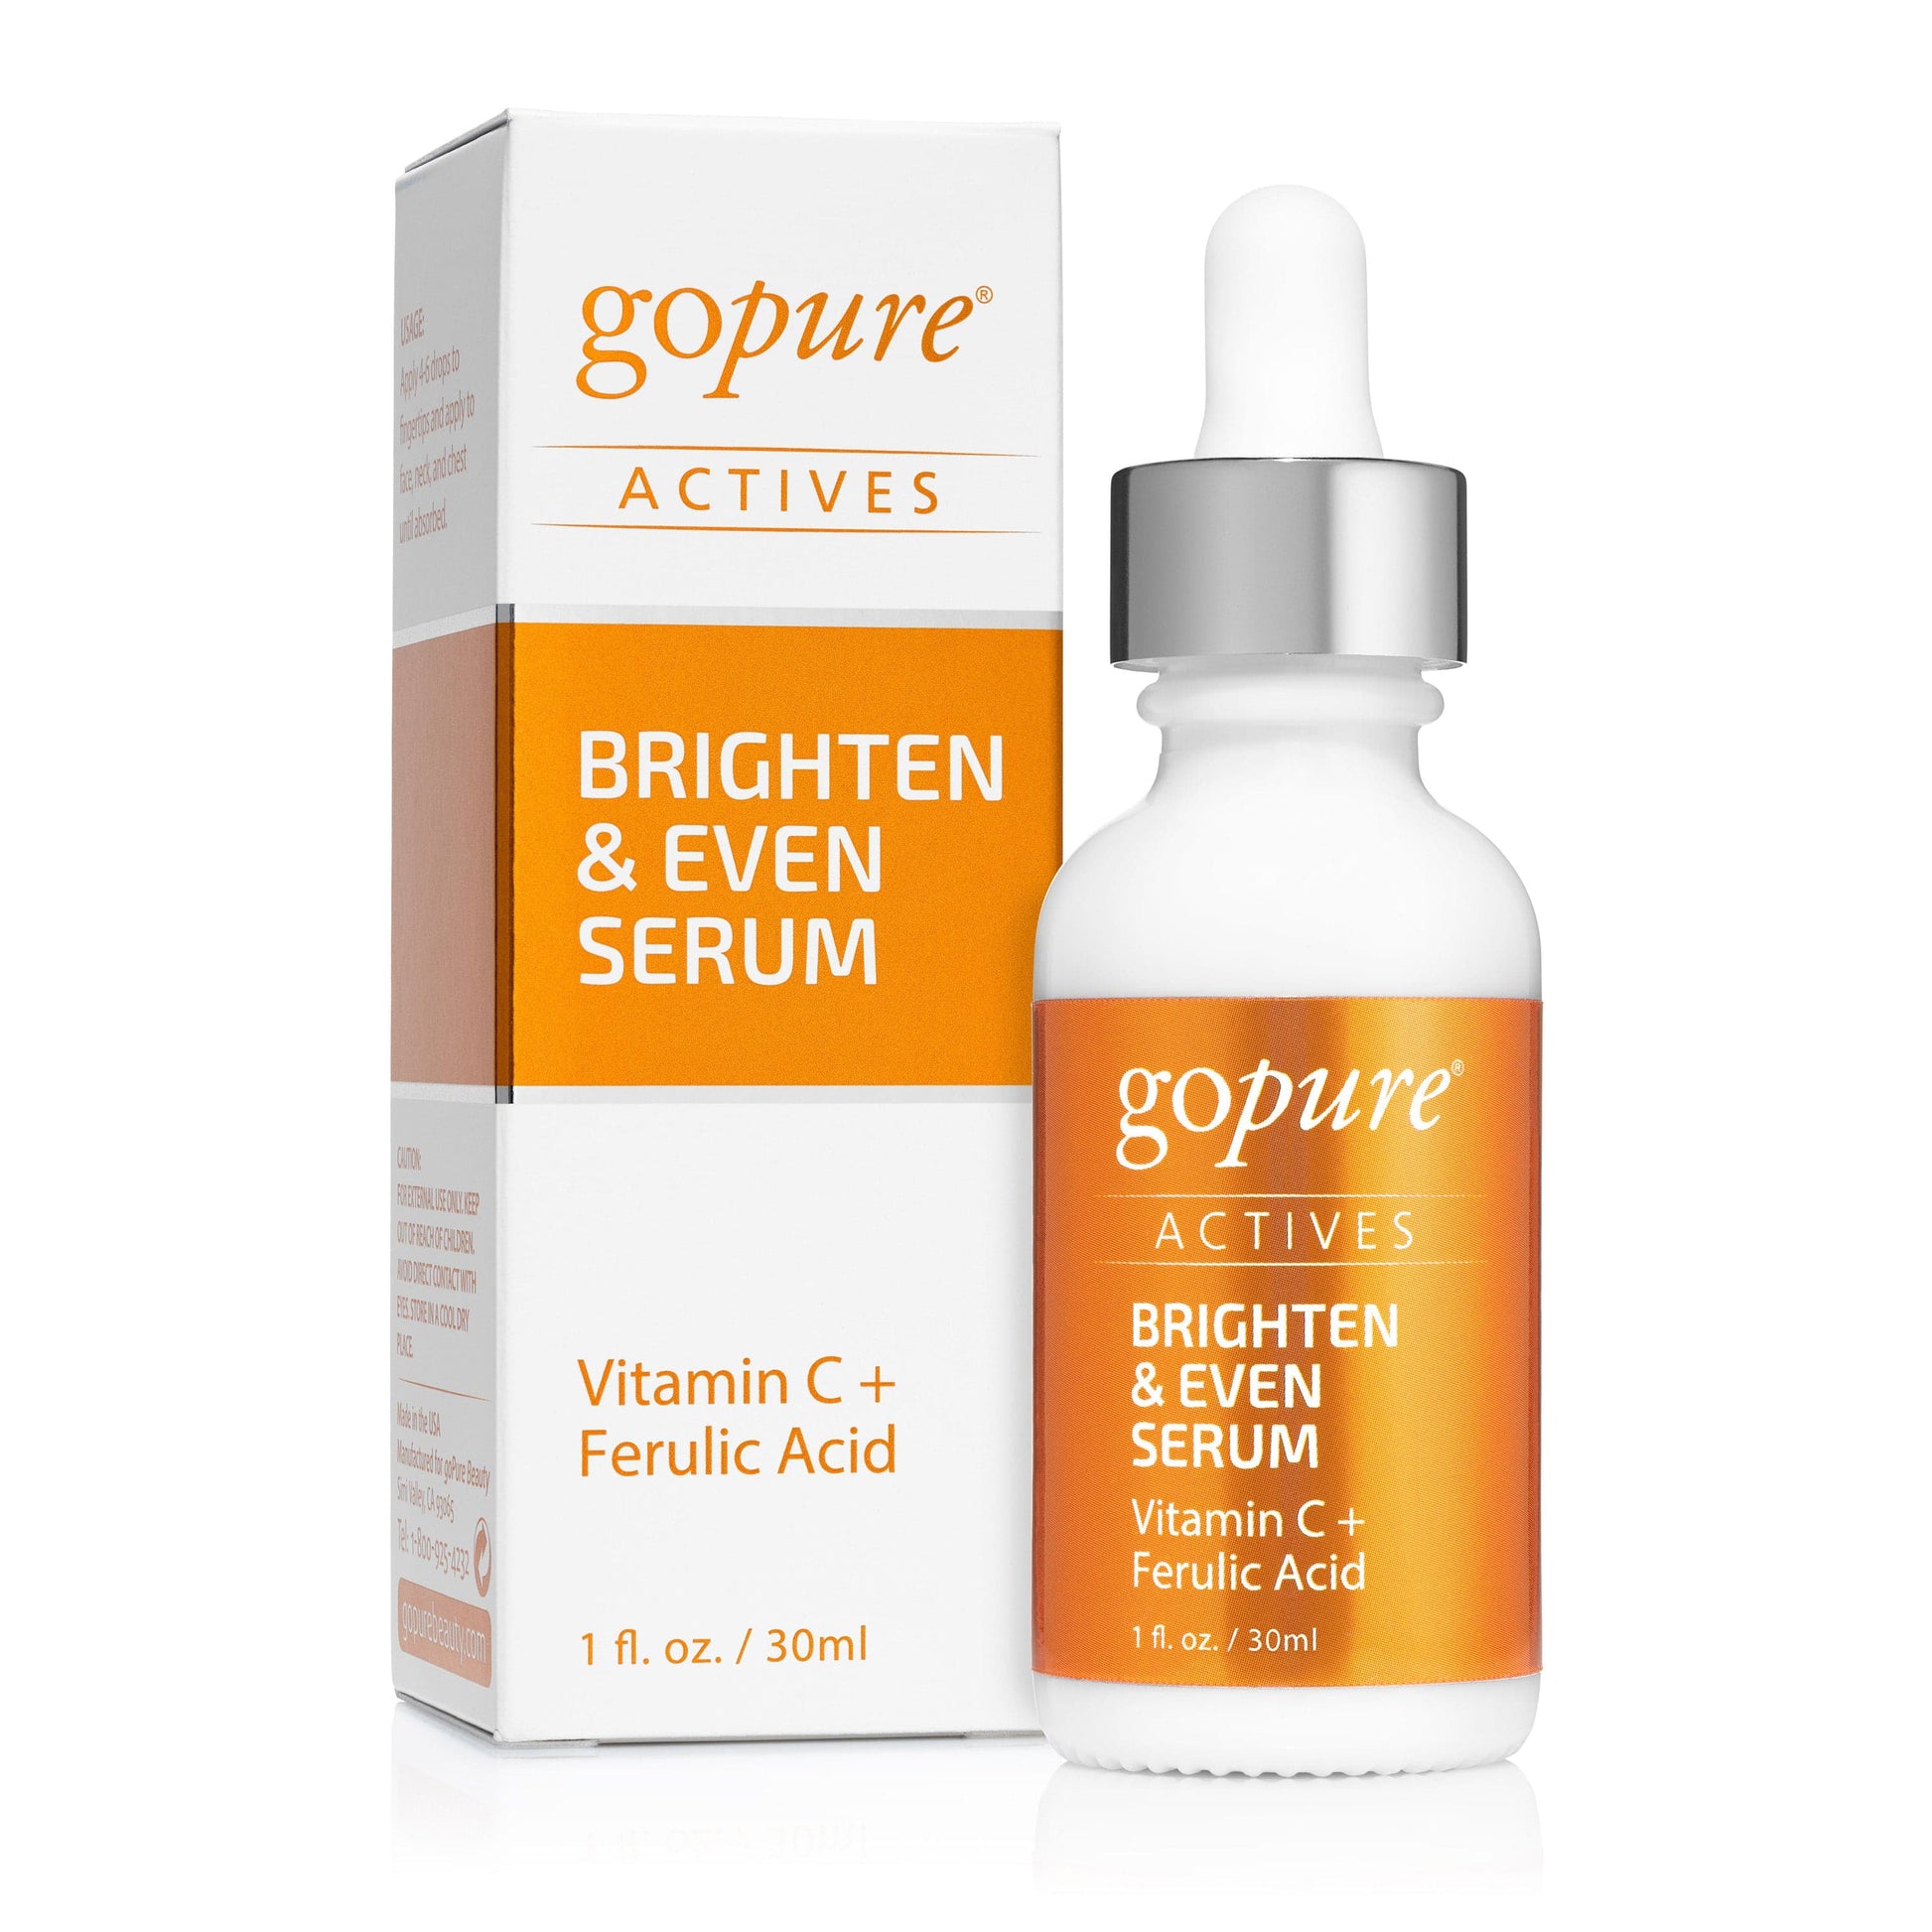 Complete 8 Product System with Actives Serums